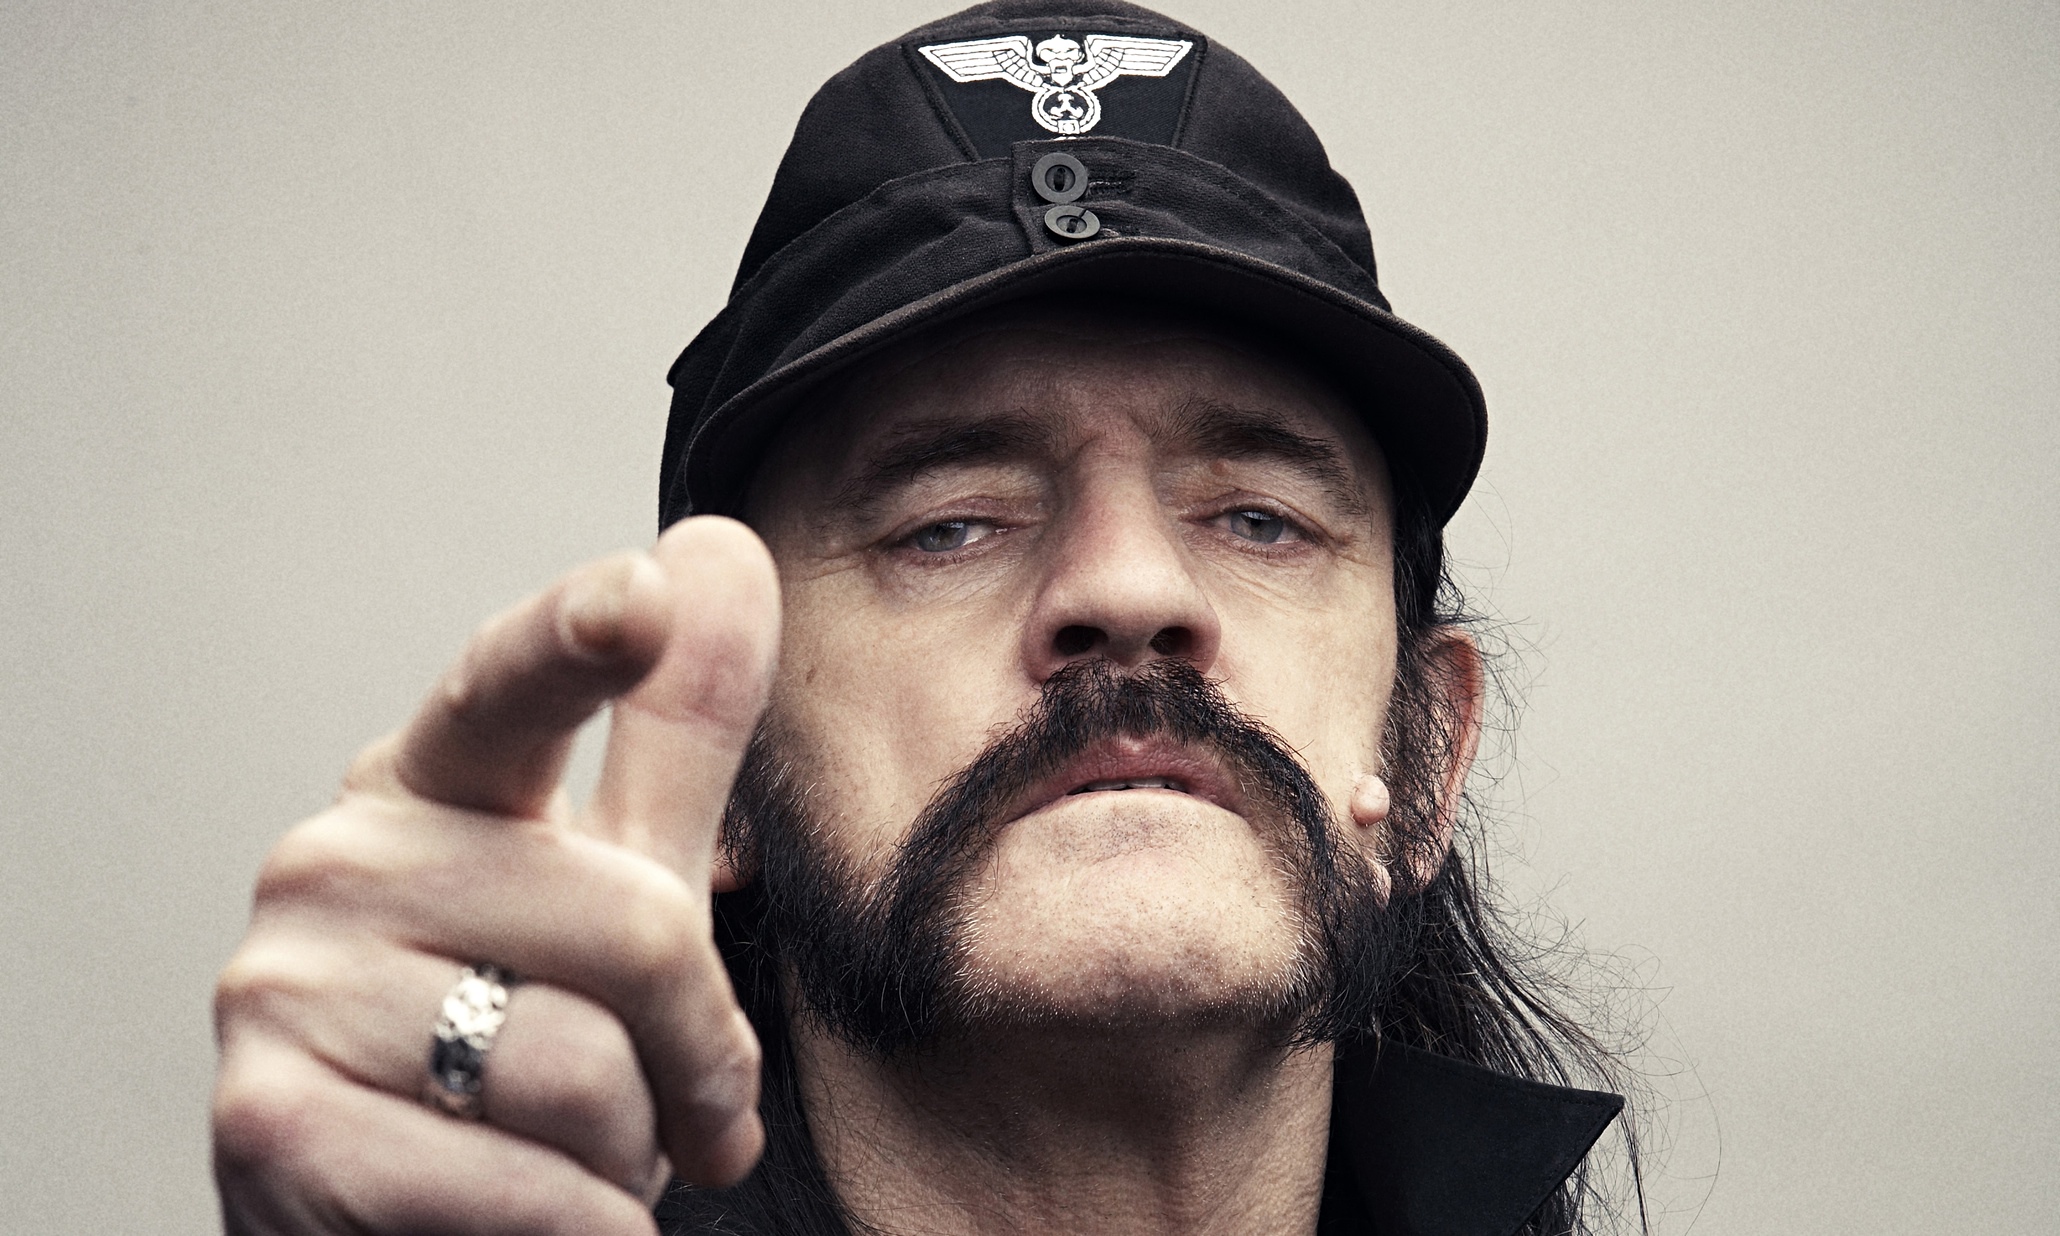 http://static.guim.co.uk/sys-images/Guardian/Pix/pictures/2015/8/13/1439465896951/Lemmy-009.jpg